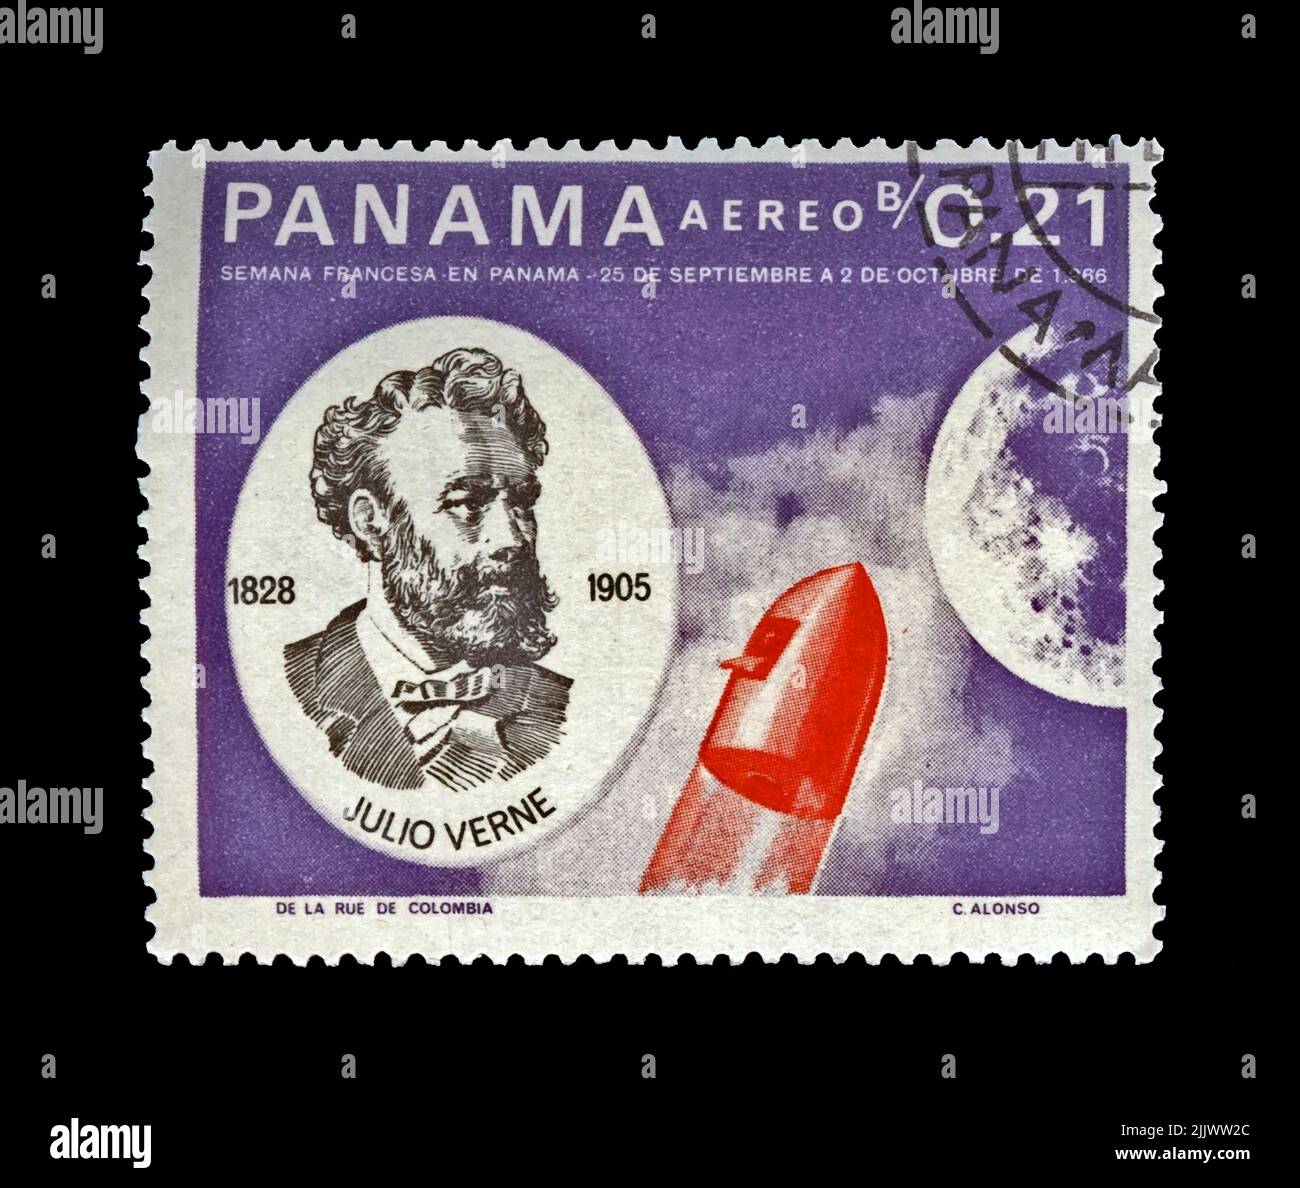 Jules Verne (1828-1905), famous science writer and capsule heading toward Moon, French Space Explorations, circa 1966. vintage postal stamp of Panama Stock Photo